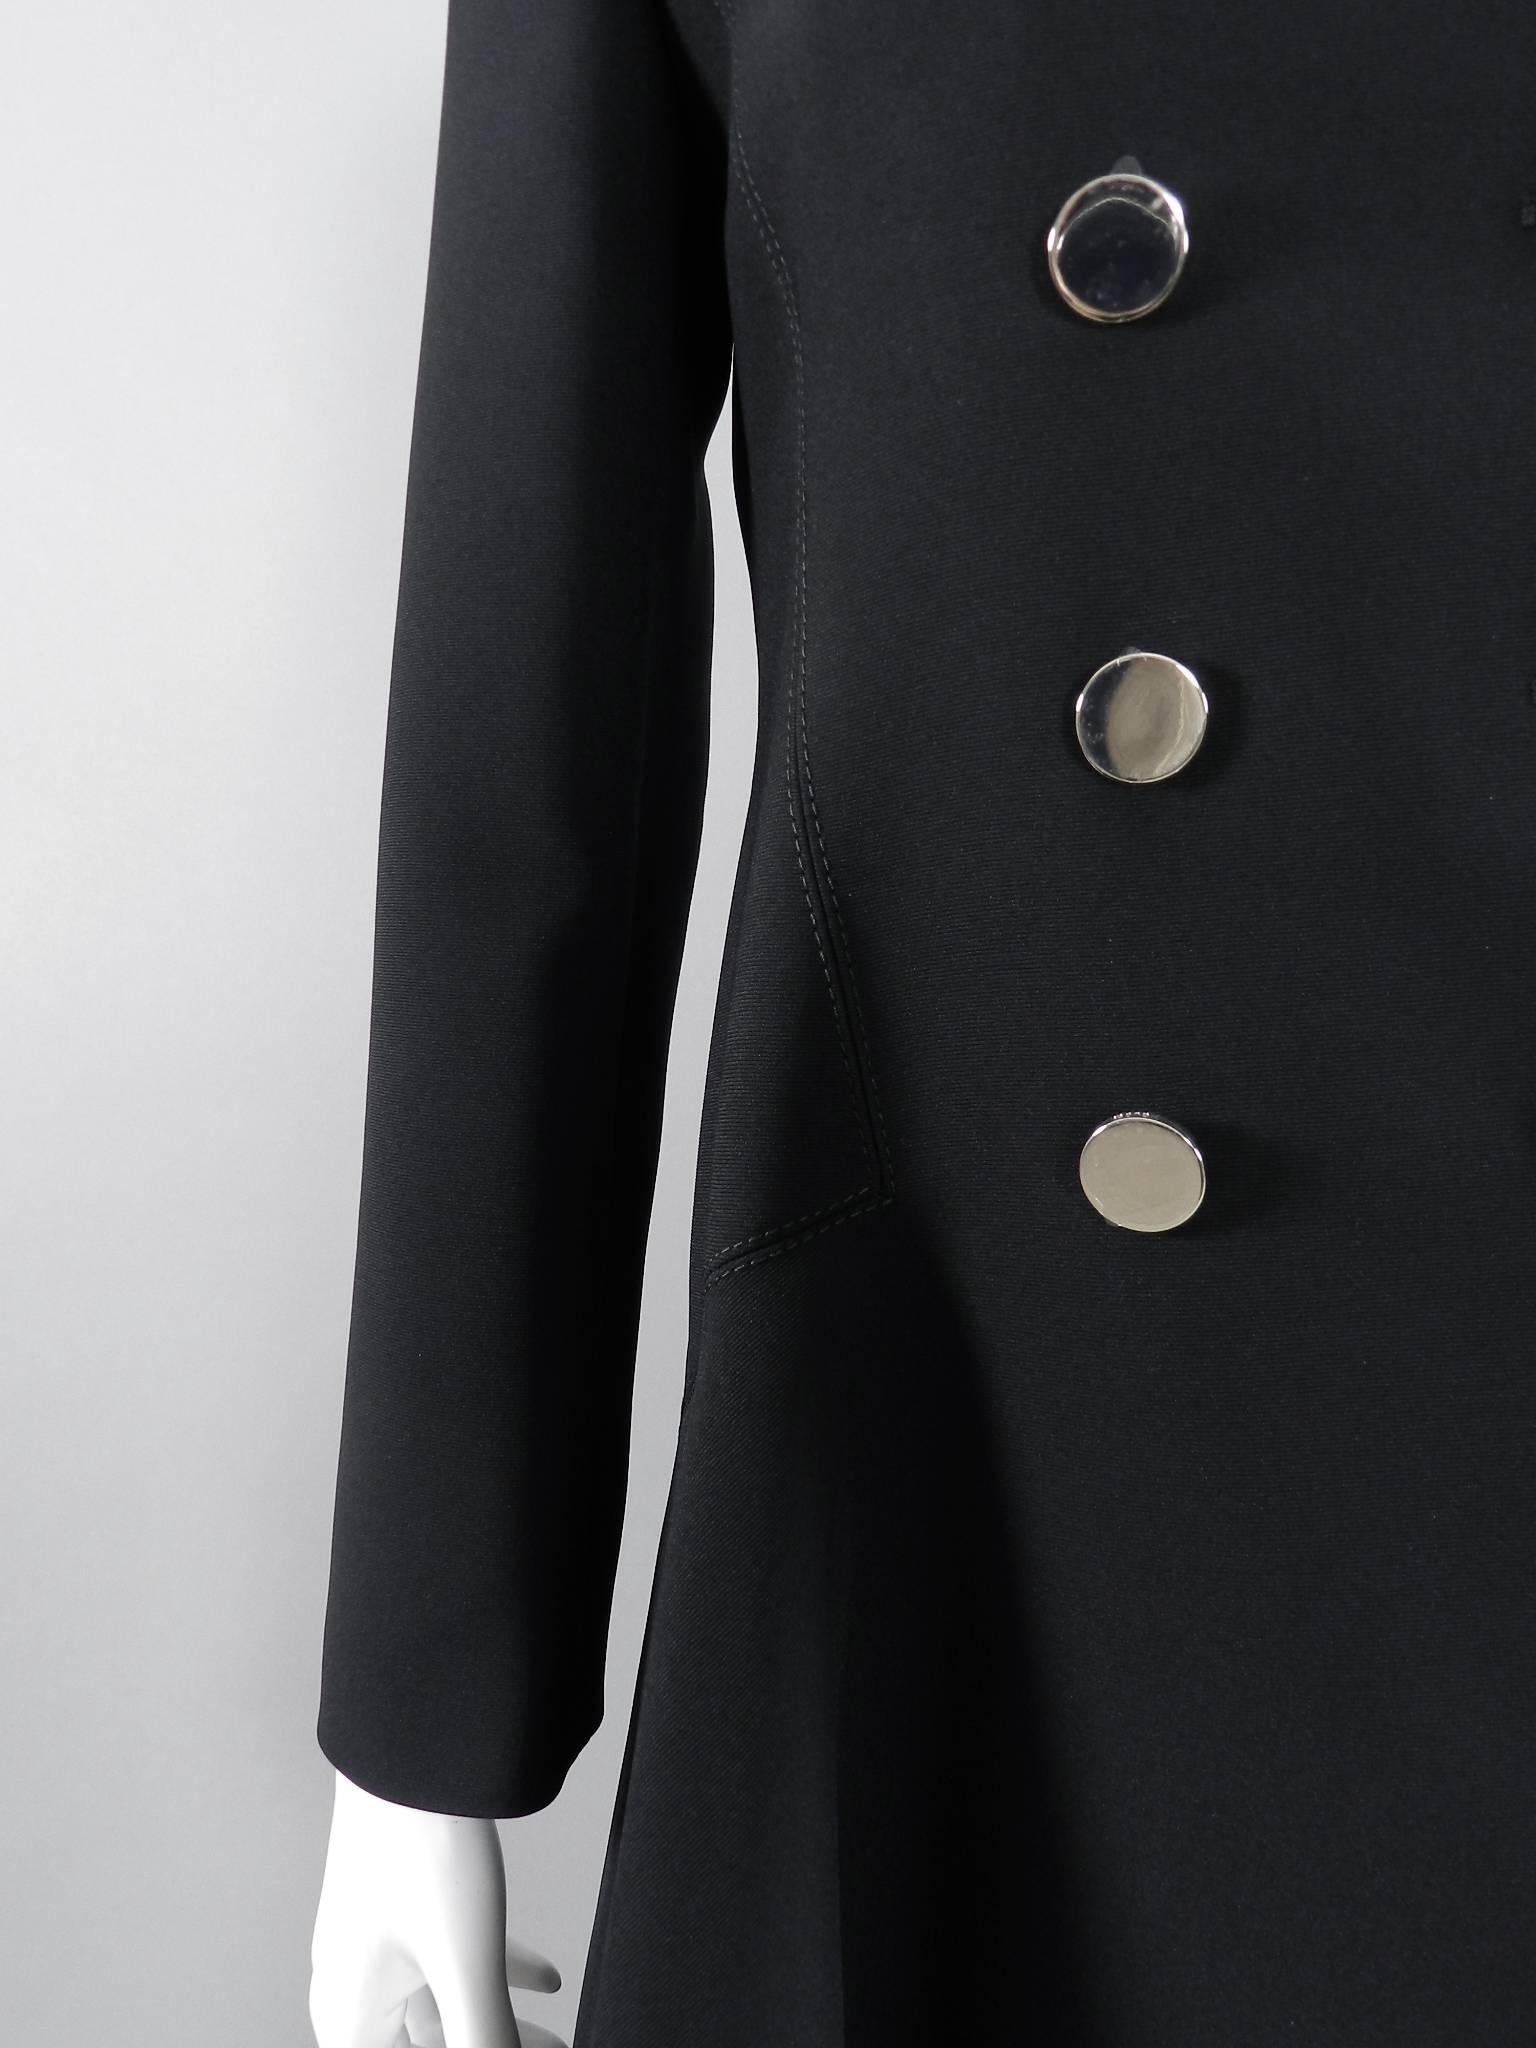 Gucci pre-fall 2014 Black Dress coat with Silver Buttons 2